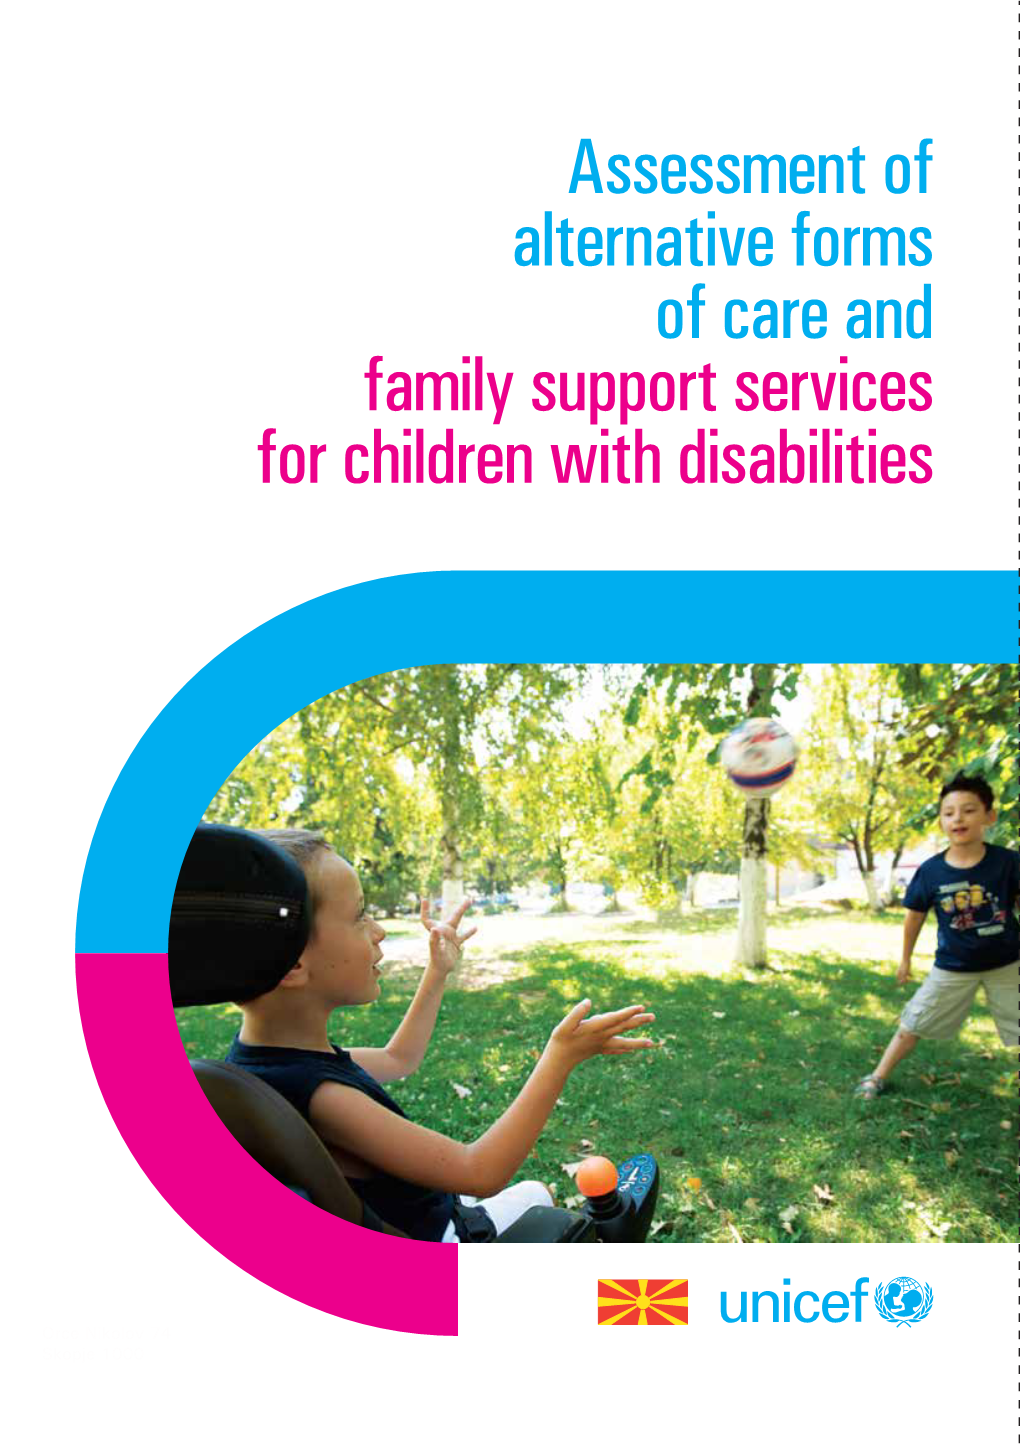 Assessment of Alternative Forms of Care and Family Support Services for Children with Disabilities